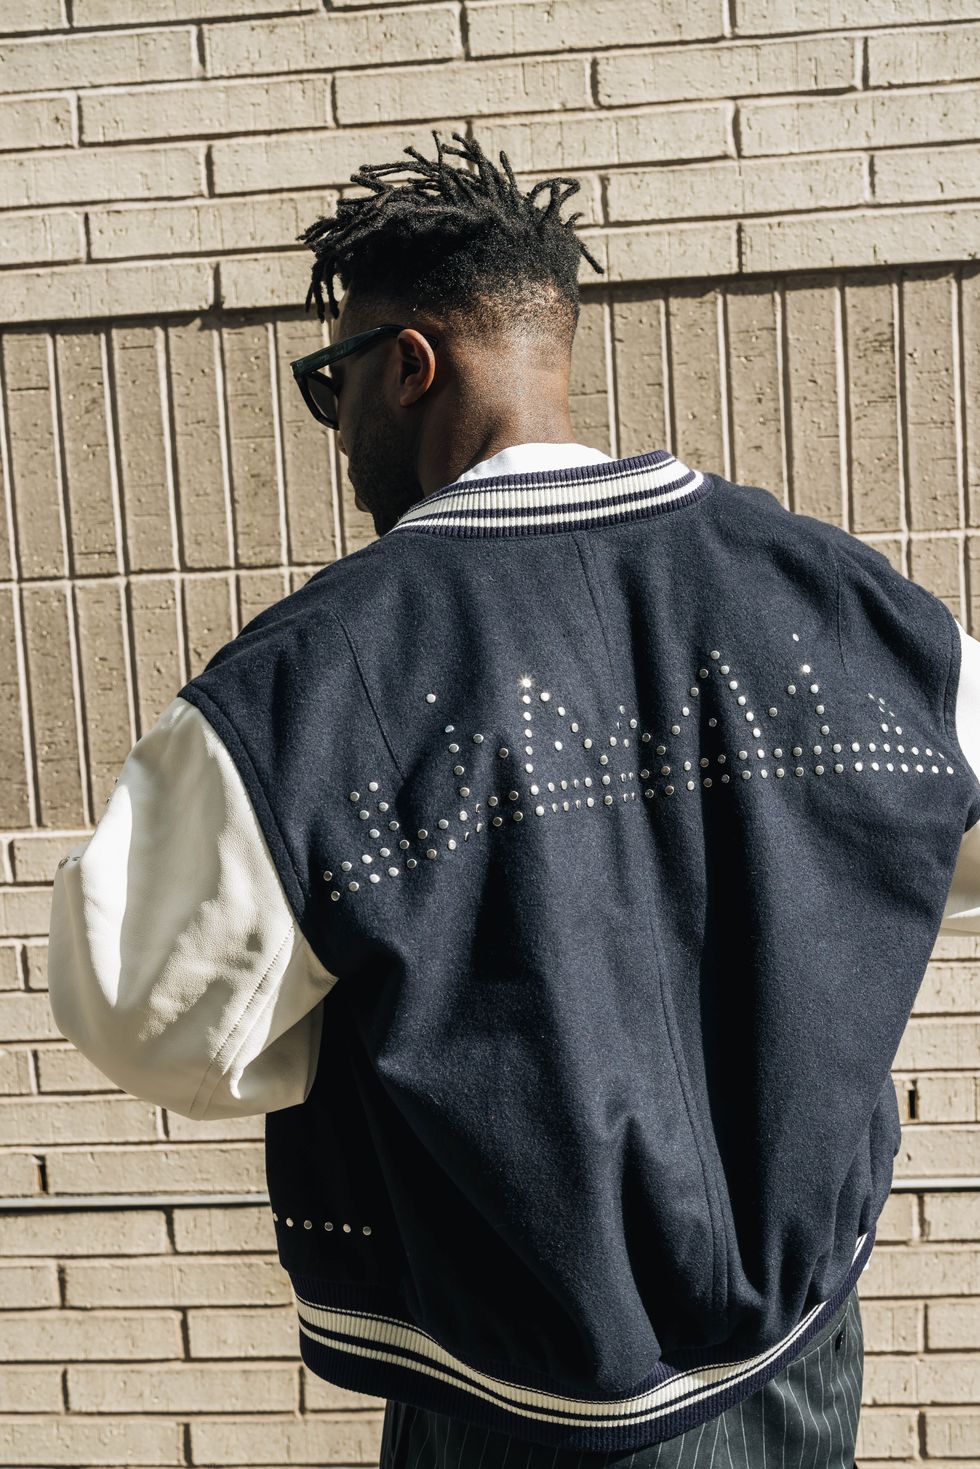 Friday Five with Nigel Sylvester